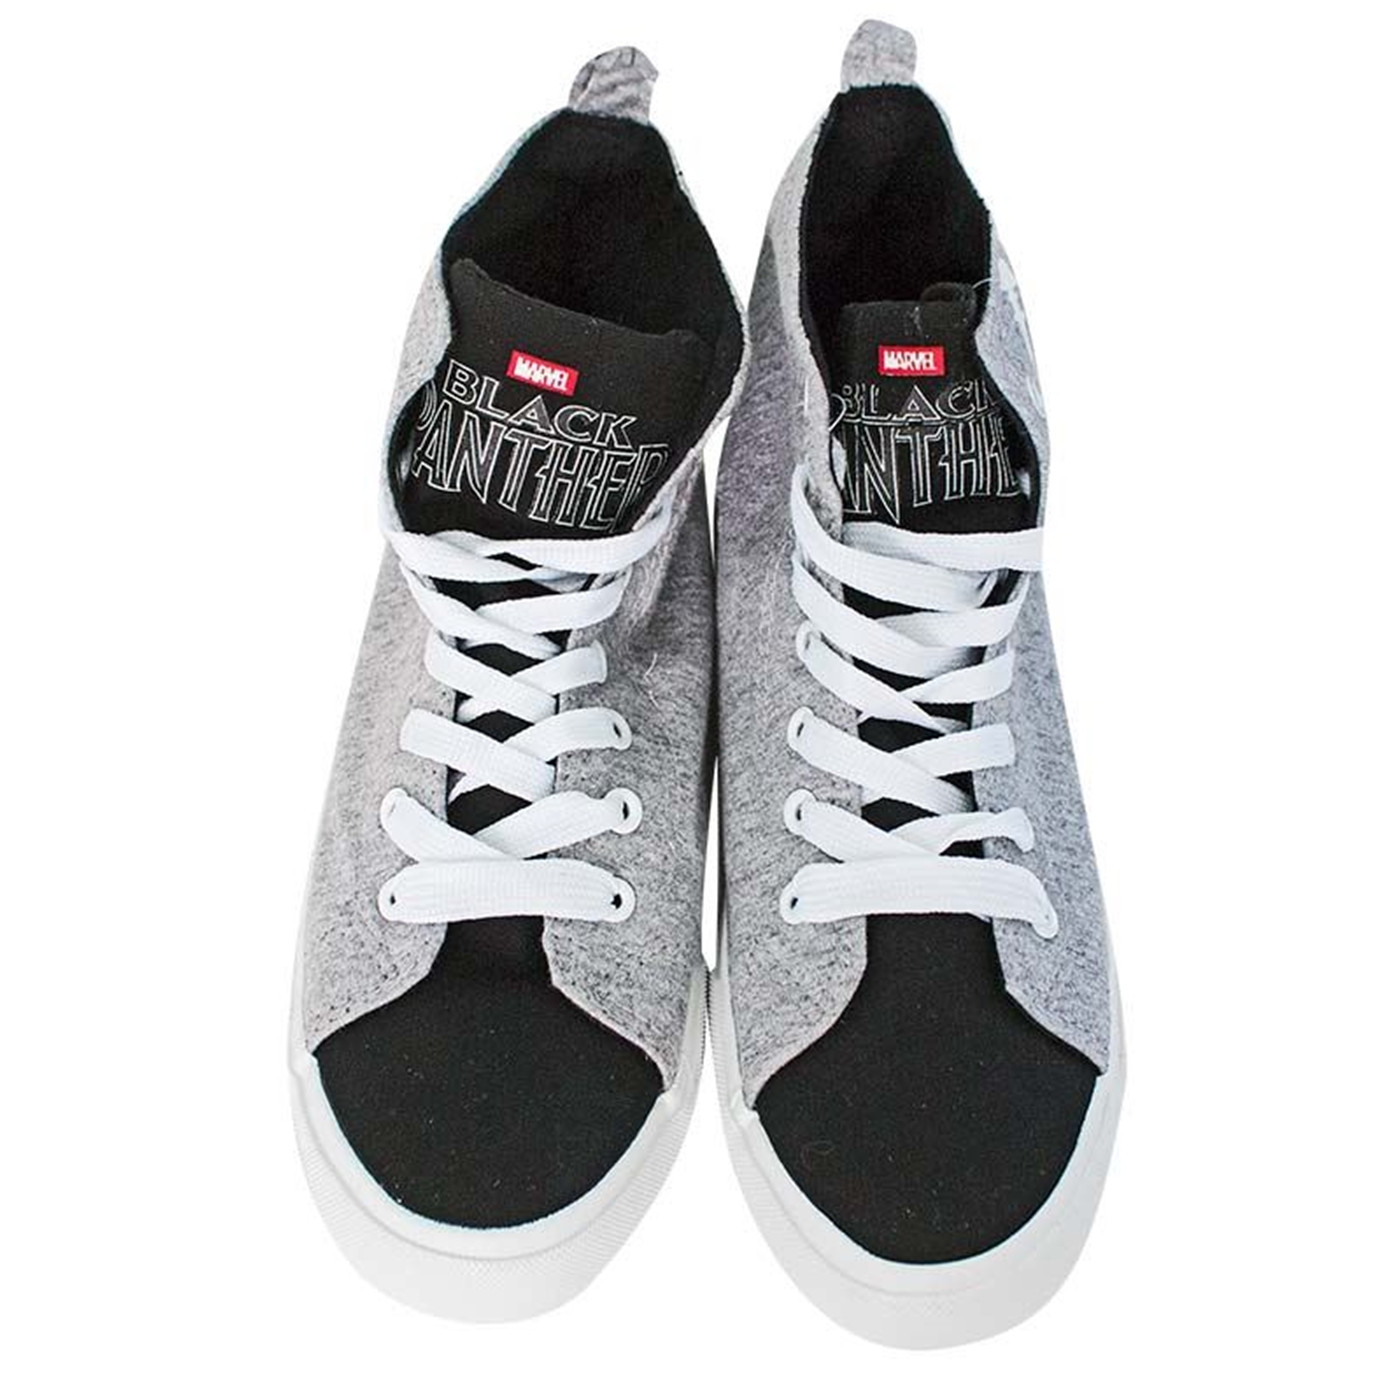 Black Panther Gray Sneakers